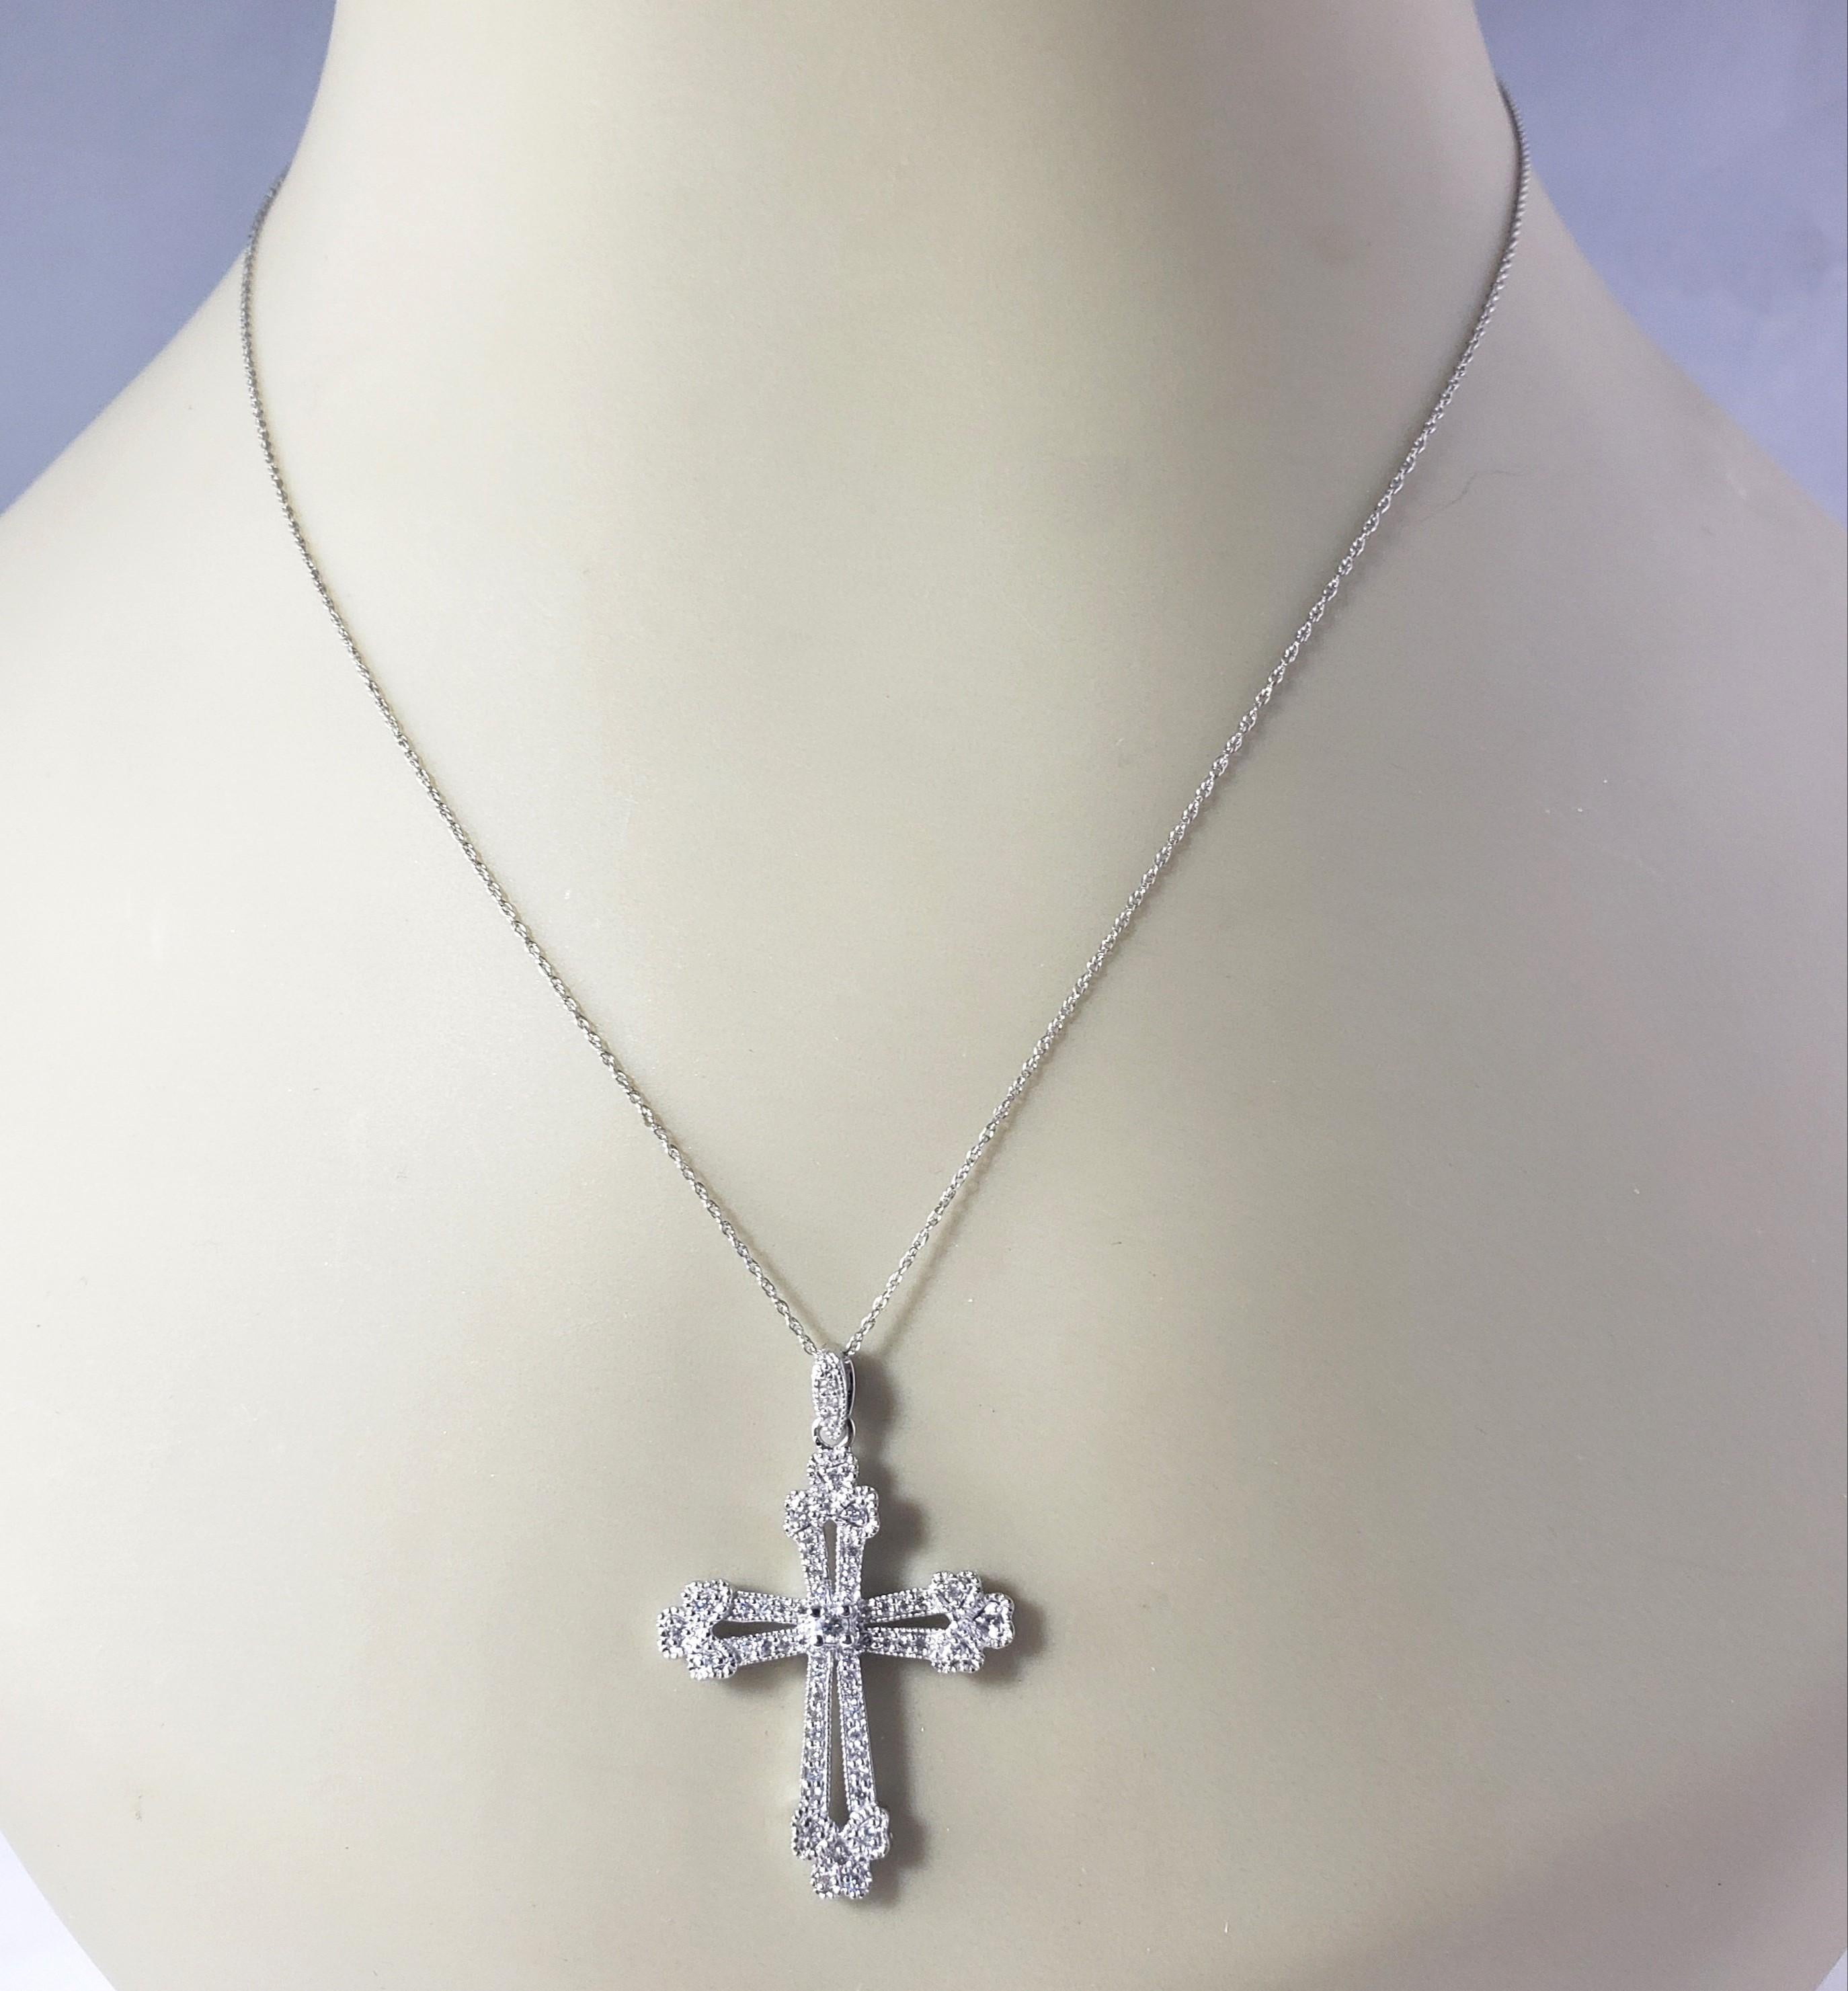 14 Karat White Gold and Diamond Cross Pendant Necklace #16633 For Sale 3